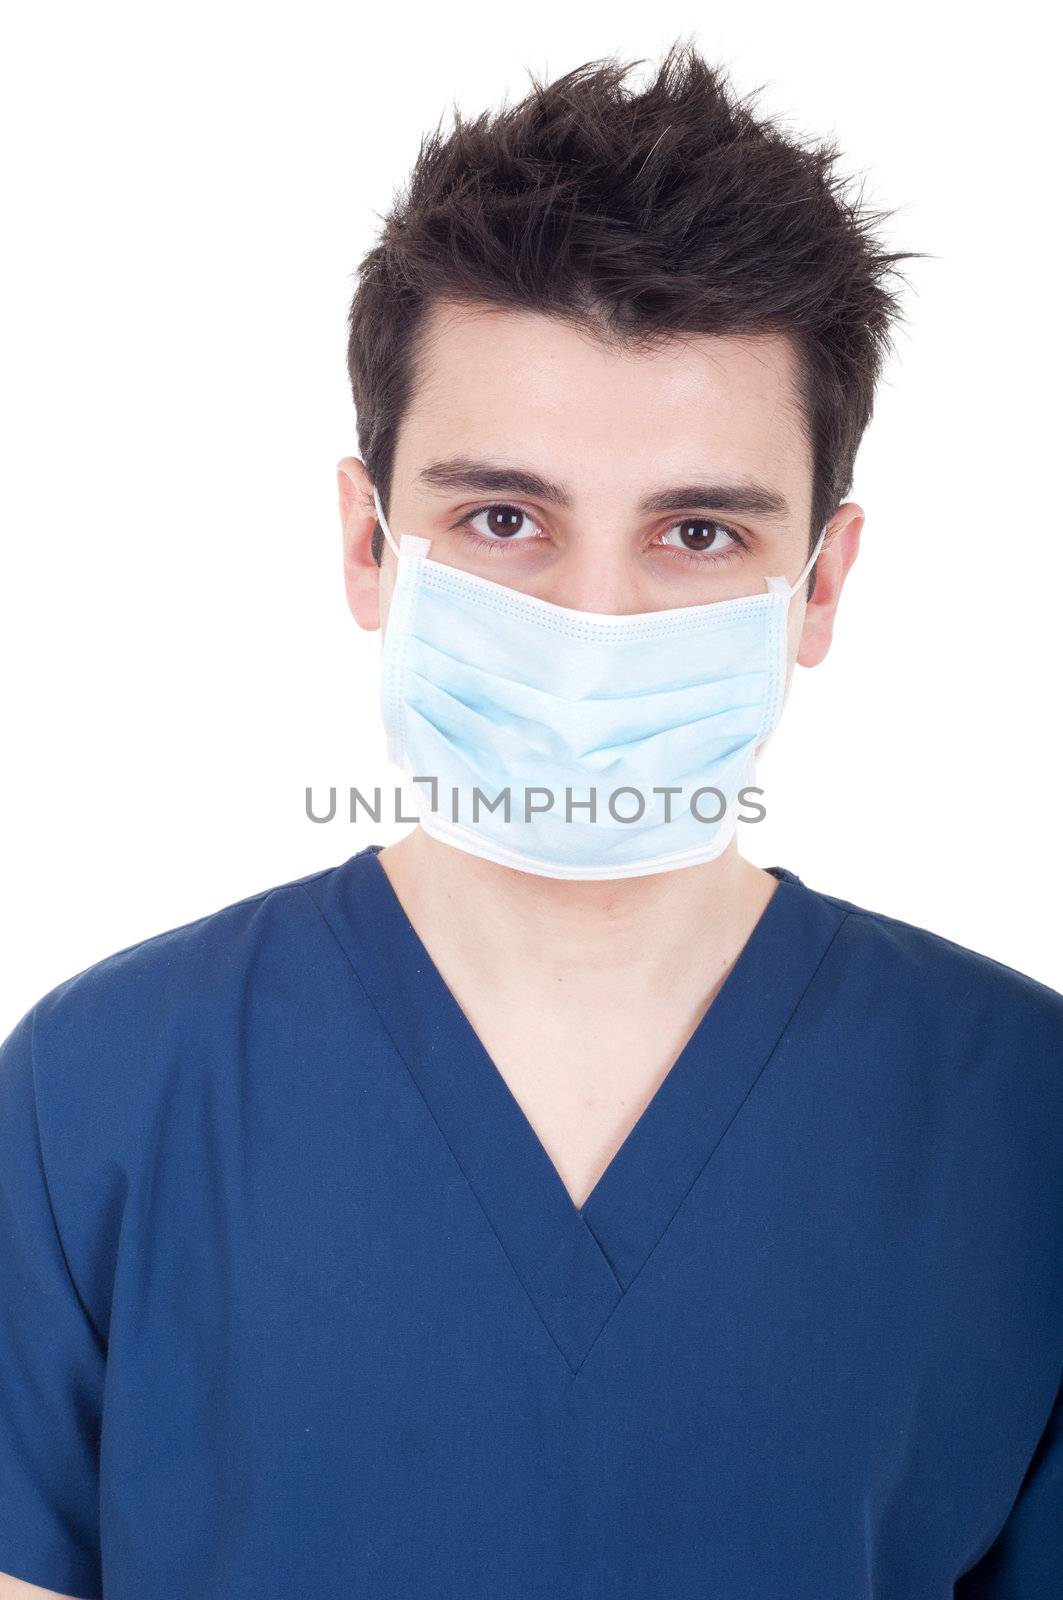 closeup portrait of a young doctor wearing mask isolated on white background